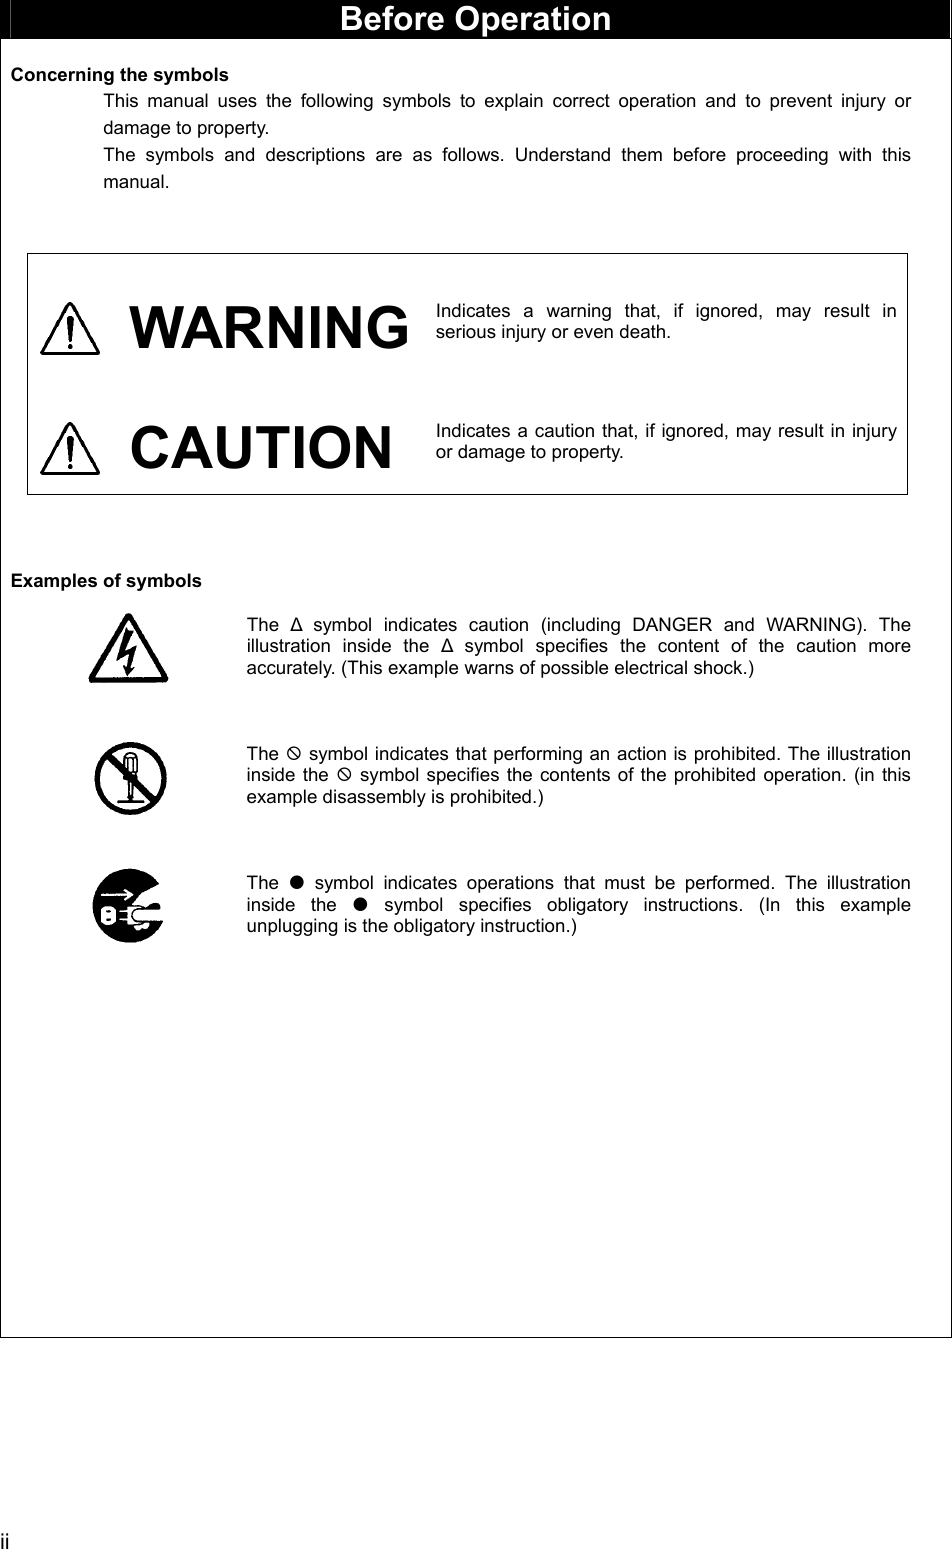  ii  Before Operation  Concerning the symbols This manual uses the following symbols to explain correct operation and to prevent injury or damage to property. The symbols and descriptions are as follows. Understand them before proceeding with this manual.   WARNING Indicates a warning that, if ignored, may result in serious injury or even death.    CAUTION Indicates a caution that, if ignored, may result in injury or damage to property.     Examples of symbols  The  Δ symbol indicates caution (including DANGER and WARNING). The illustration inside the Δ symbol specifies the content of the caution more accurately. (This example warns of possible electrical shock.)    The ; symbol indicates that performing an action is prohibited. The illustration inside the ; symbol specifies the contents of the prohibited operation. (in this example disassembly is prohibited.)    The  z symbol indicates operations that must be performed. The illustration inside the z symbol specifies obligatory instructions. (In this example unplugging is the obligatory instruction.)      